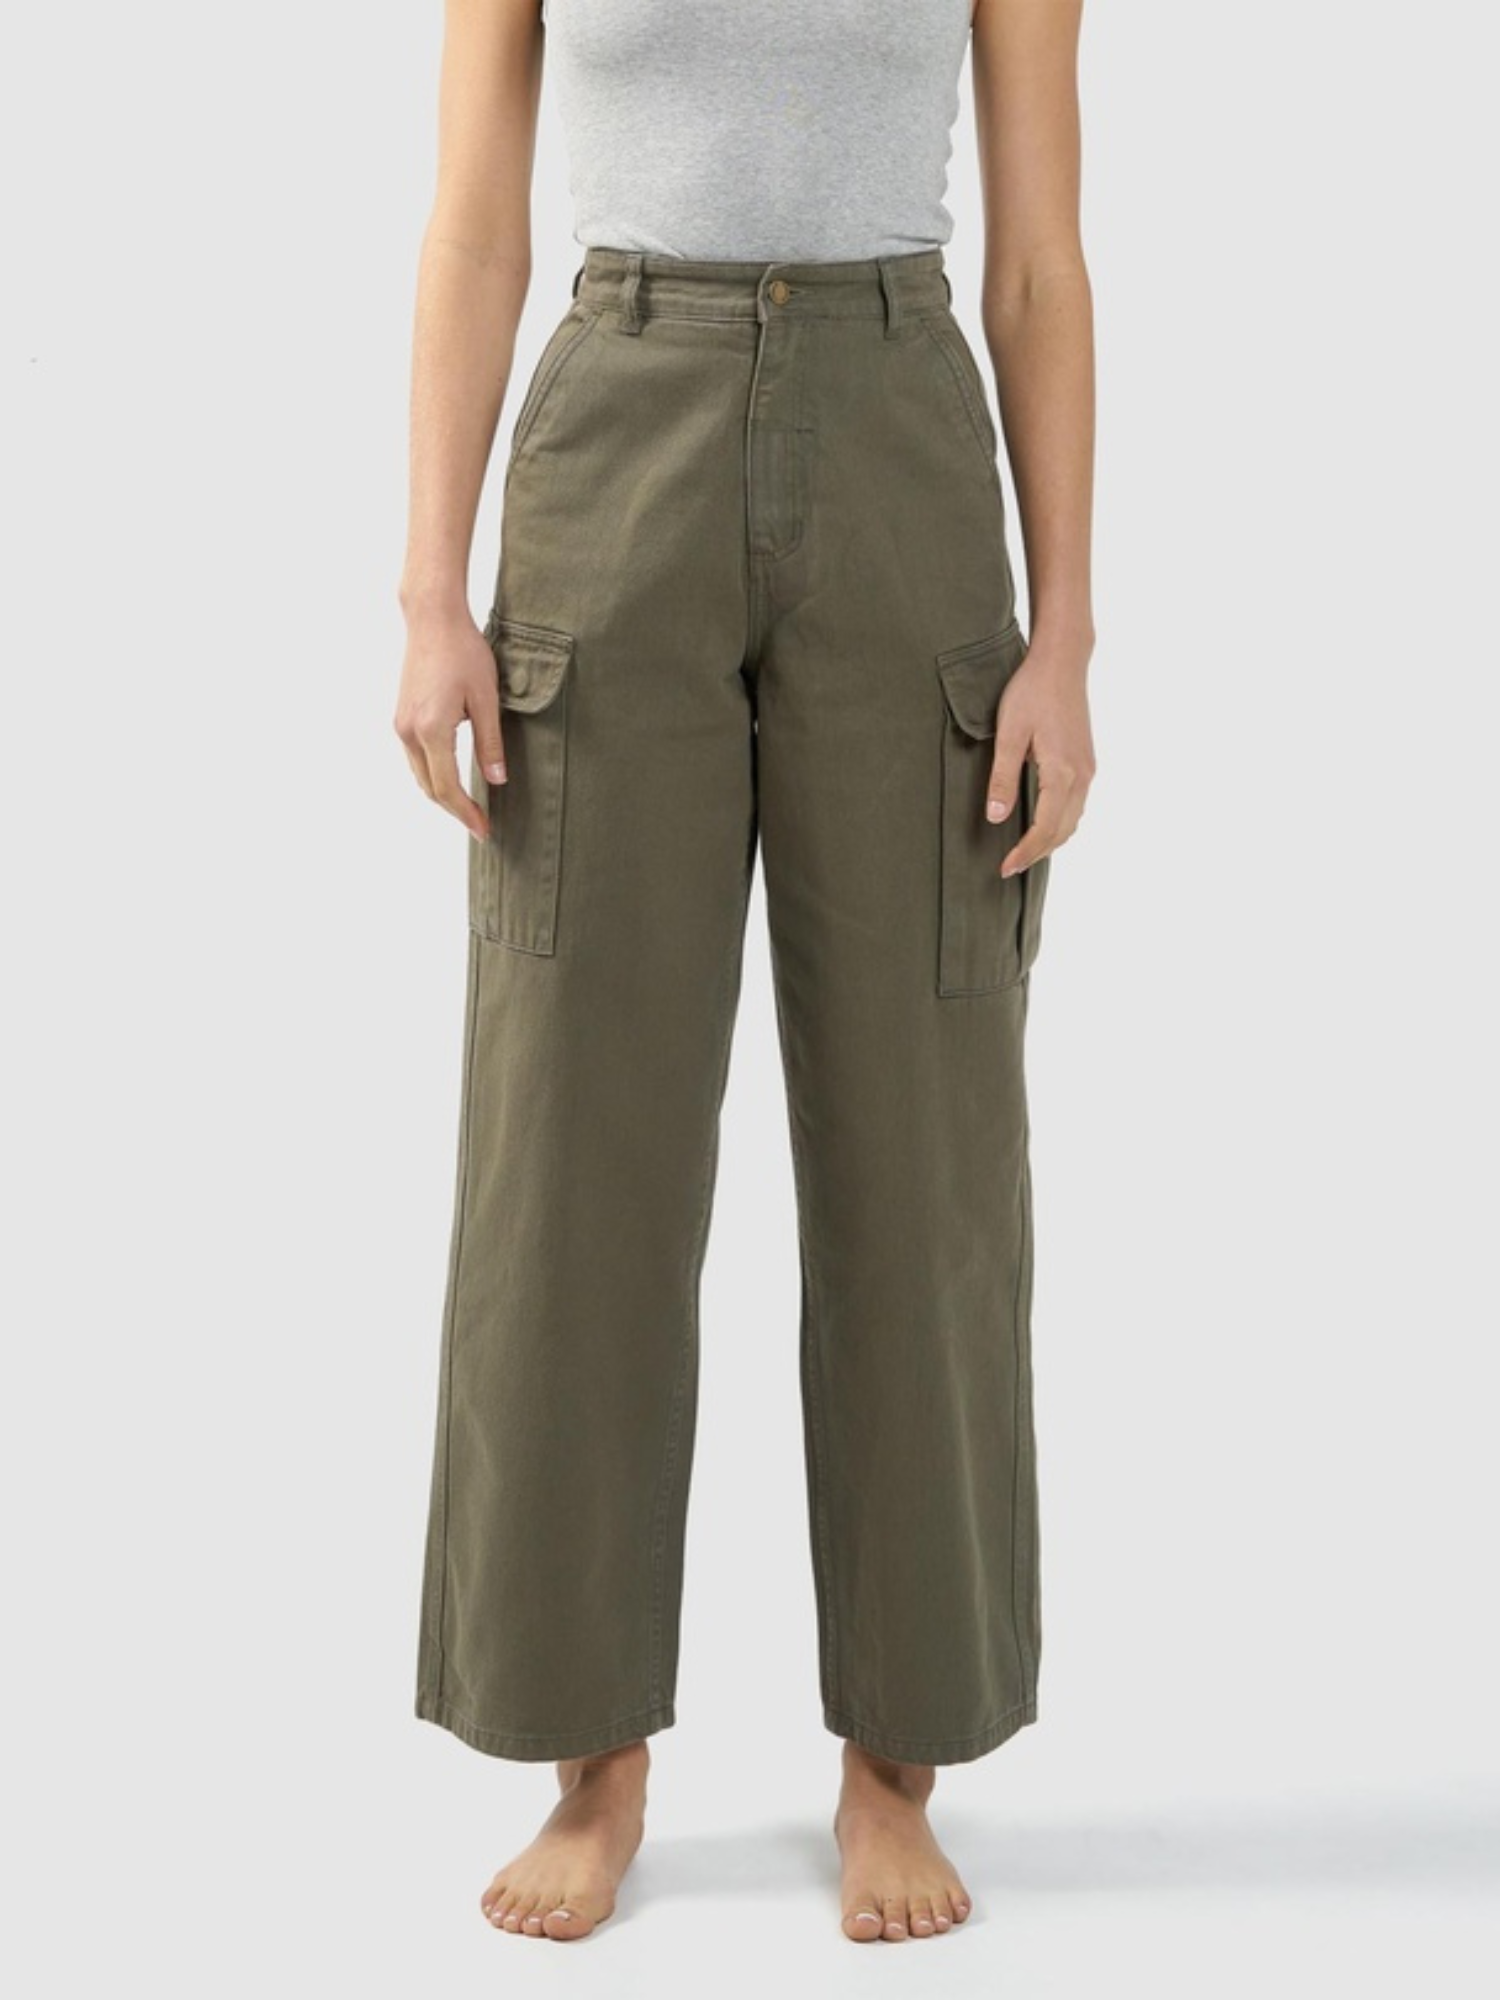 Thrills Union Baggy Pant ~ Mild Army